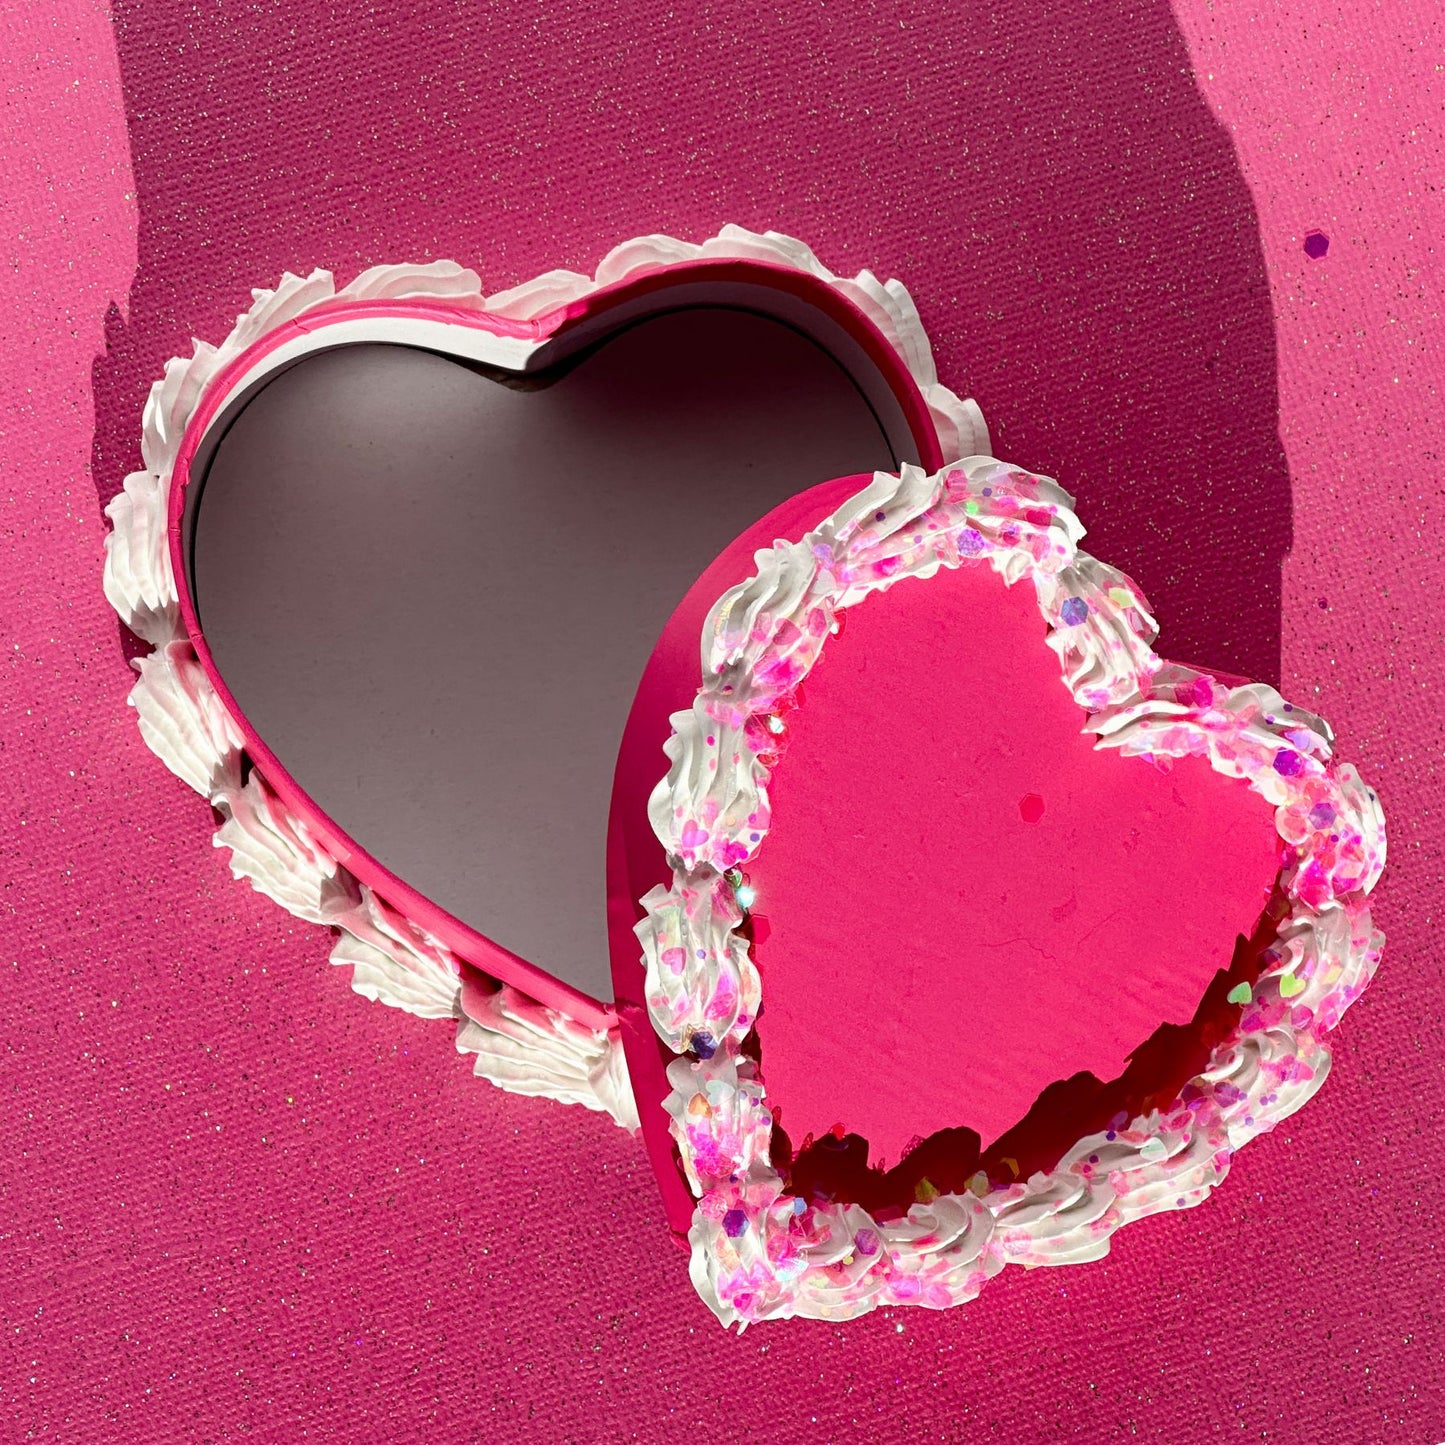 3D Painted Cake - Heart Box Pink With Pink Glitter